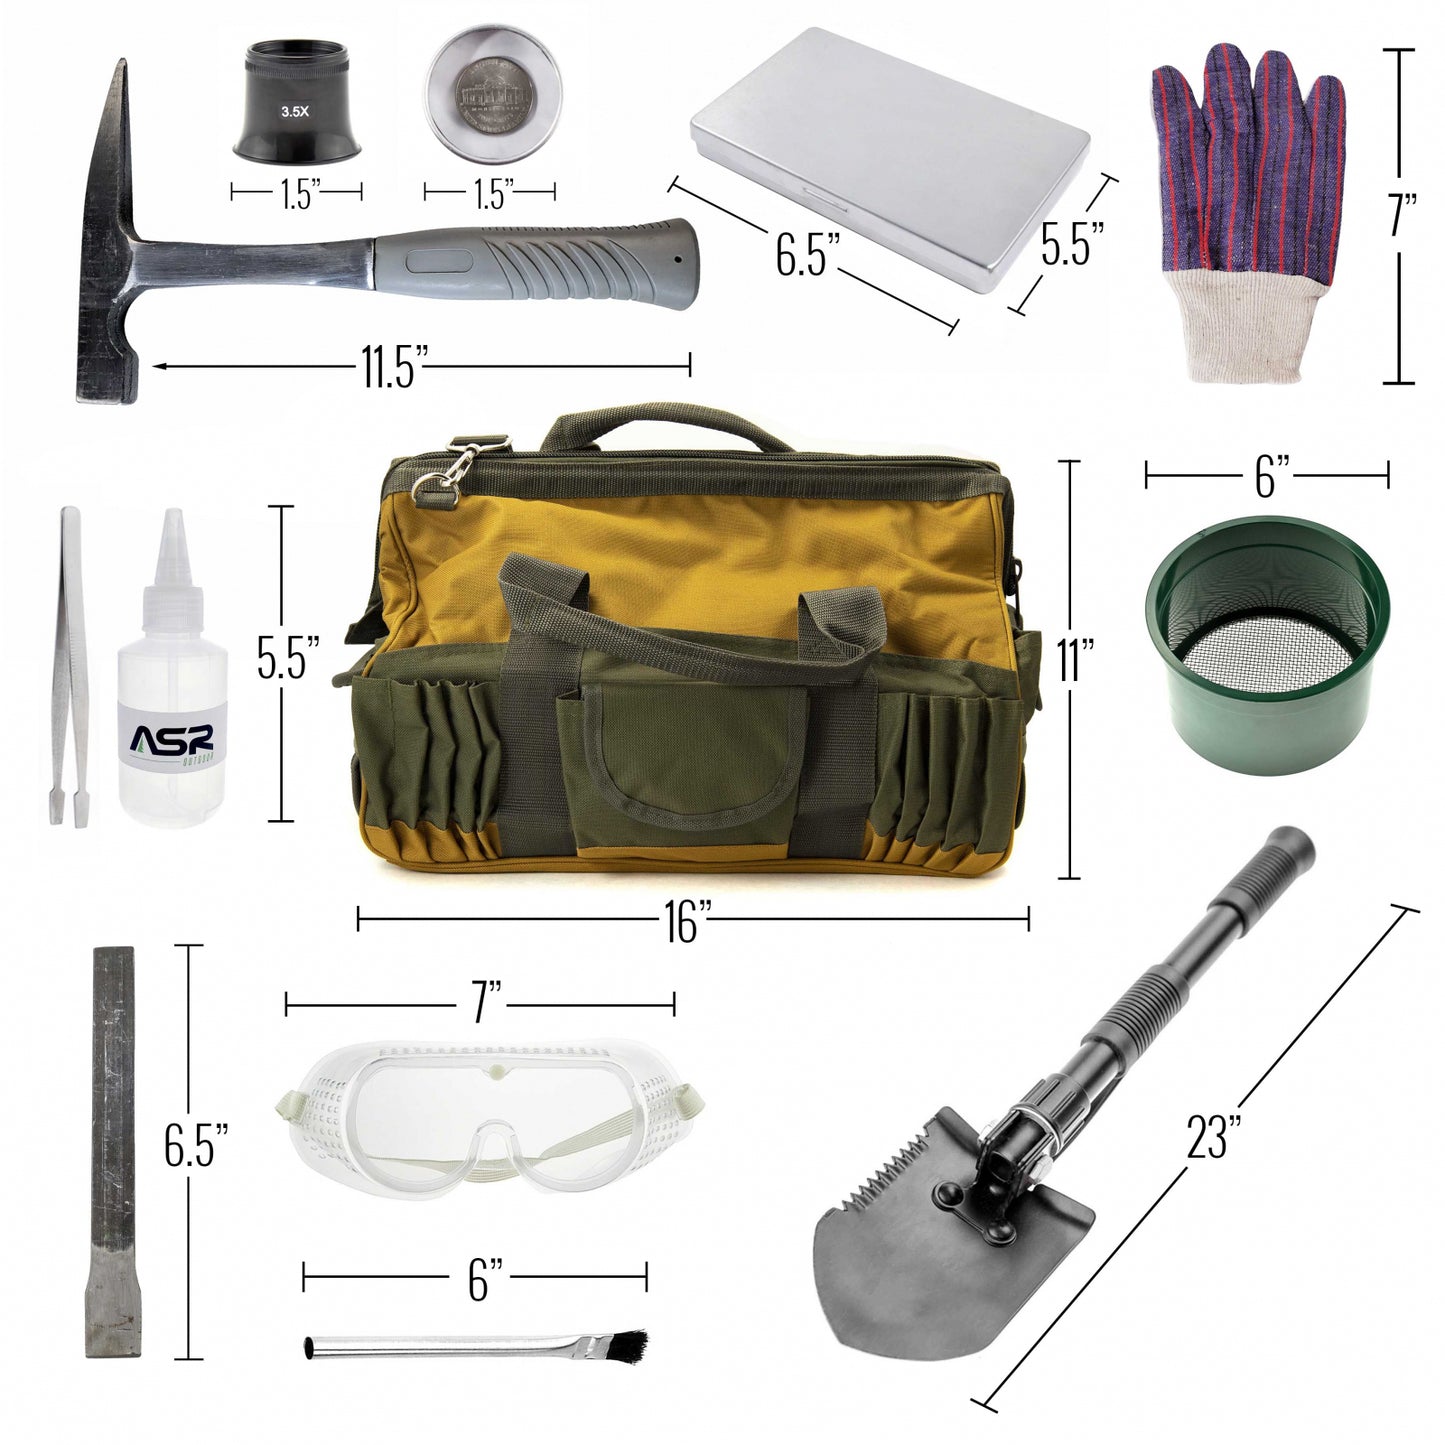 13pc Geology Rock Hounding Kit with Mining Tools and Deluxe Carry Bag